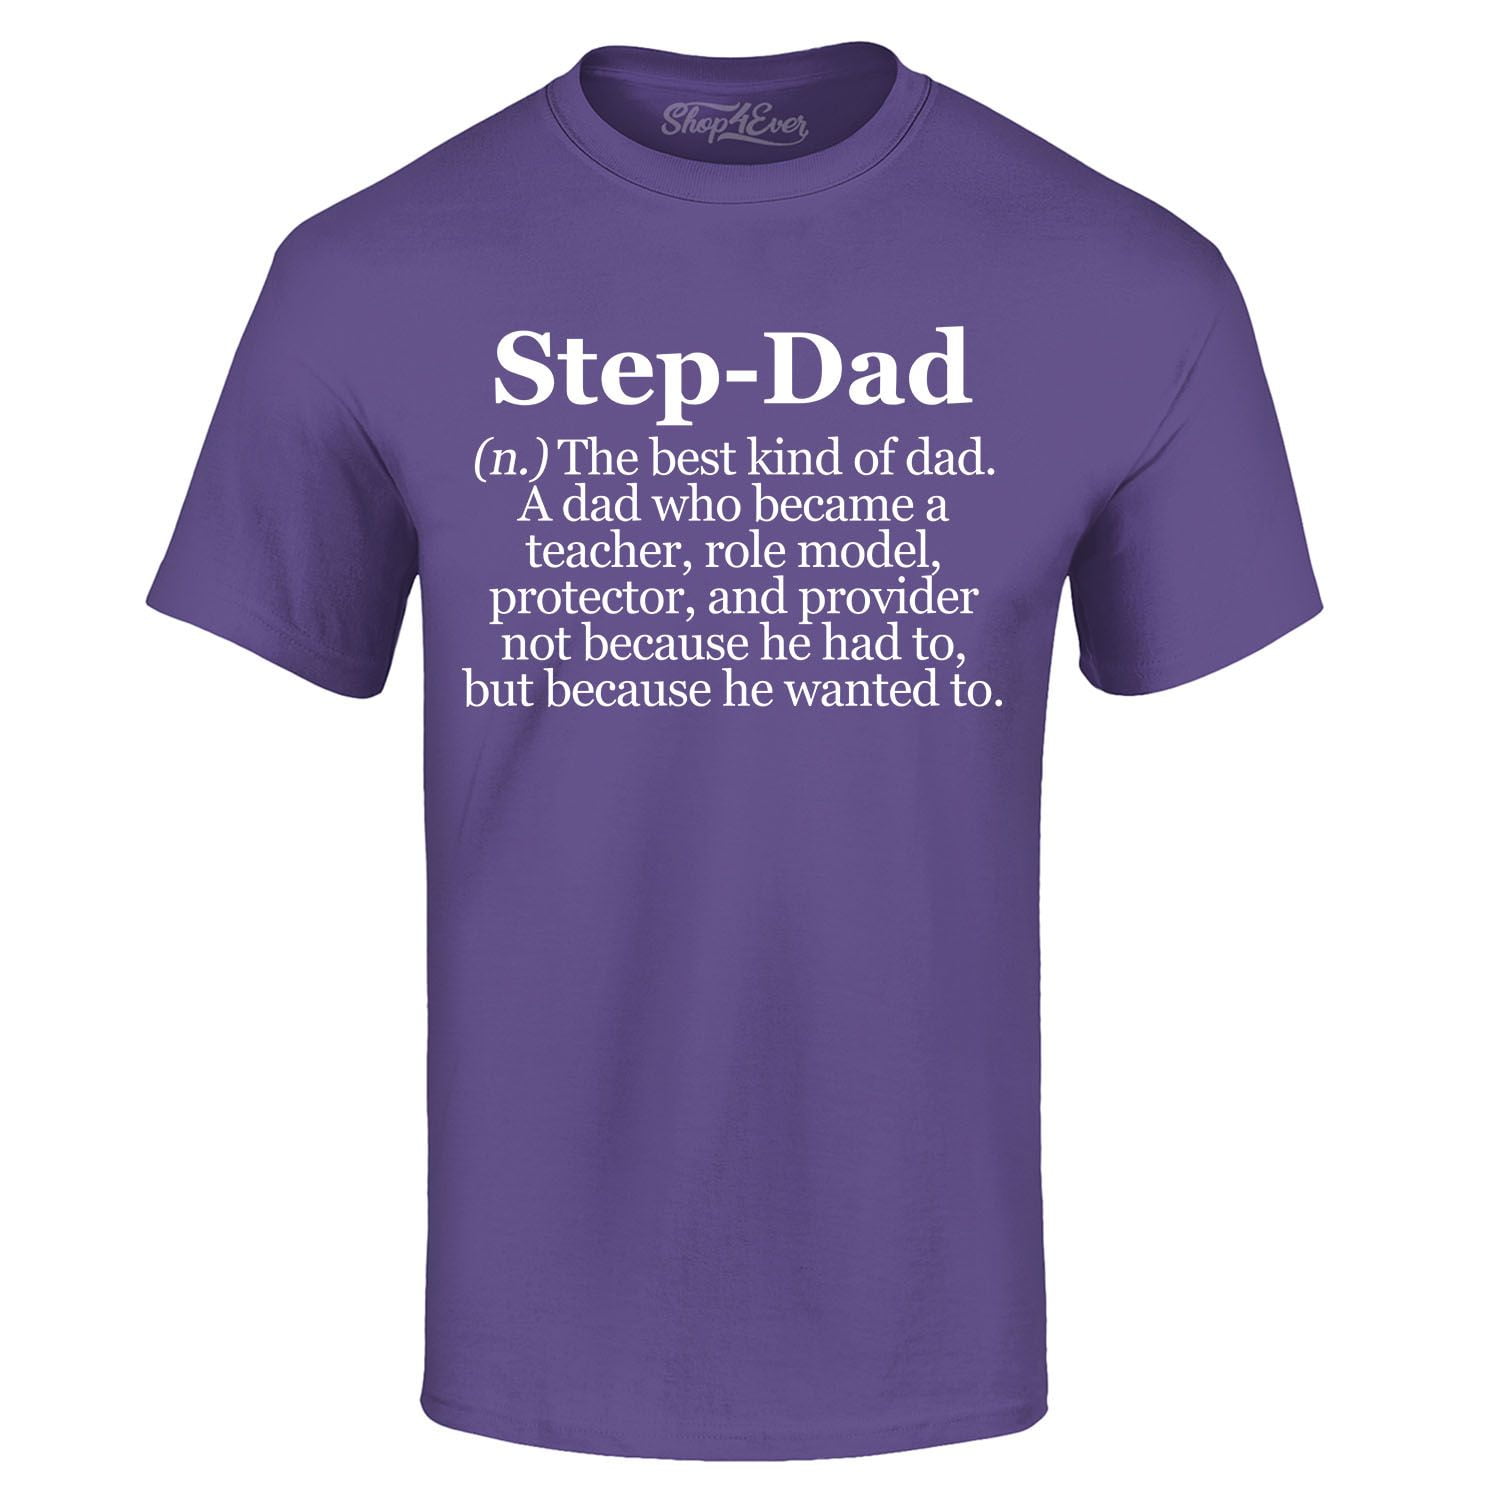 Crazy Elliptical Dad Essential T-Shirt for Sale by EricJP